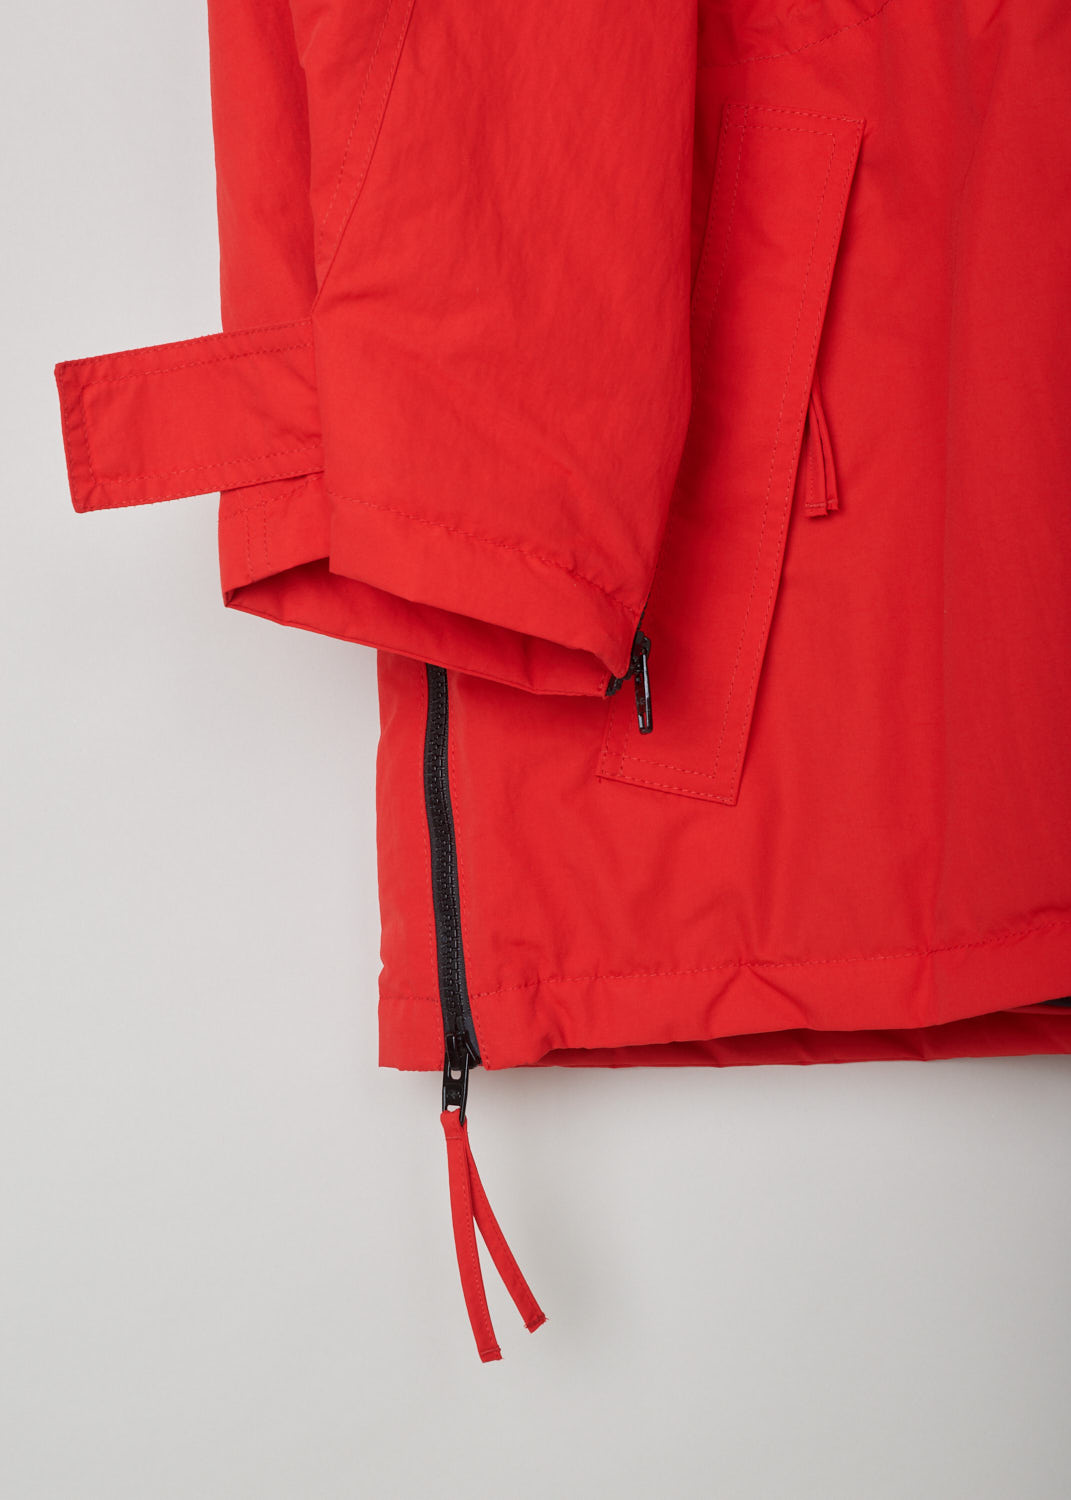 Balenciaga, Red parka model, 646774_TJ014_6400, red, detail2. Red oversized parka has lots of features beginning with the hood which is lined and detachable with press buttons. Going down this model has 4 pockets 2 on chest height 2 below that, with al the pockets being forward slanted. There is a cord tunnel on the inside with which the width of the waist can be adjusted. The fun part of this parka is the zipper which starts from the sides going up to the armpit and ending on the sleeves. Comes with zip fastening 